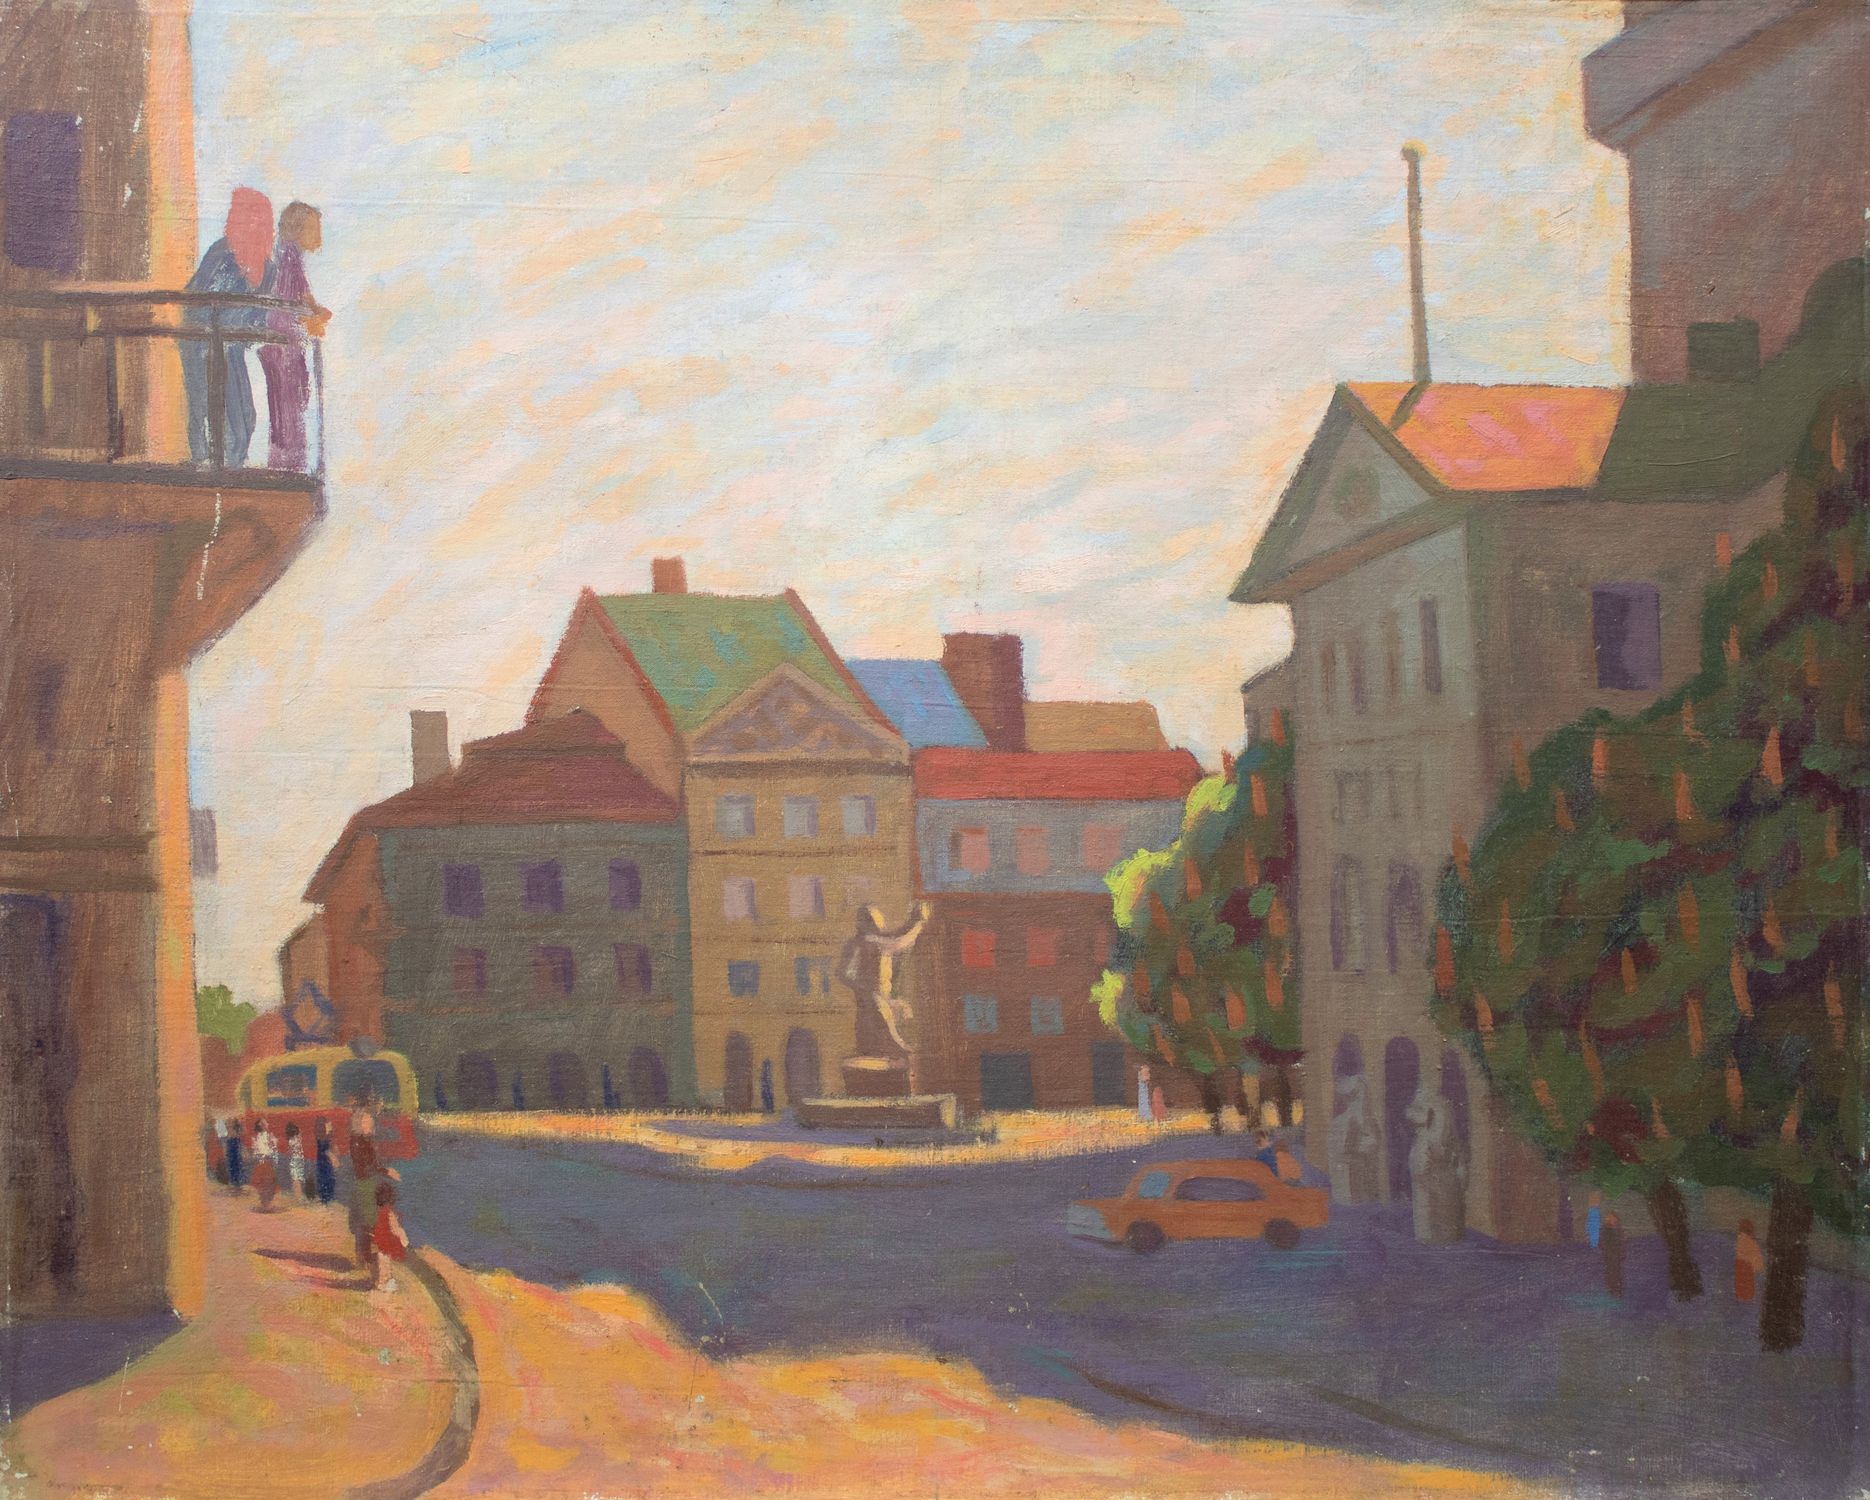 "Market square from Russian street"